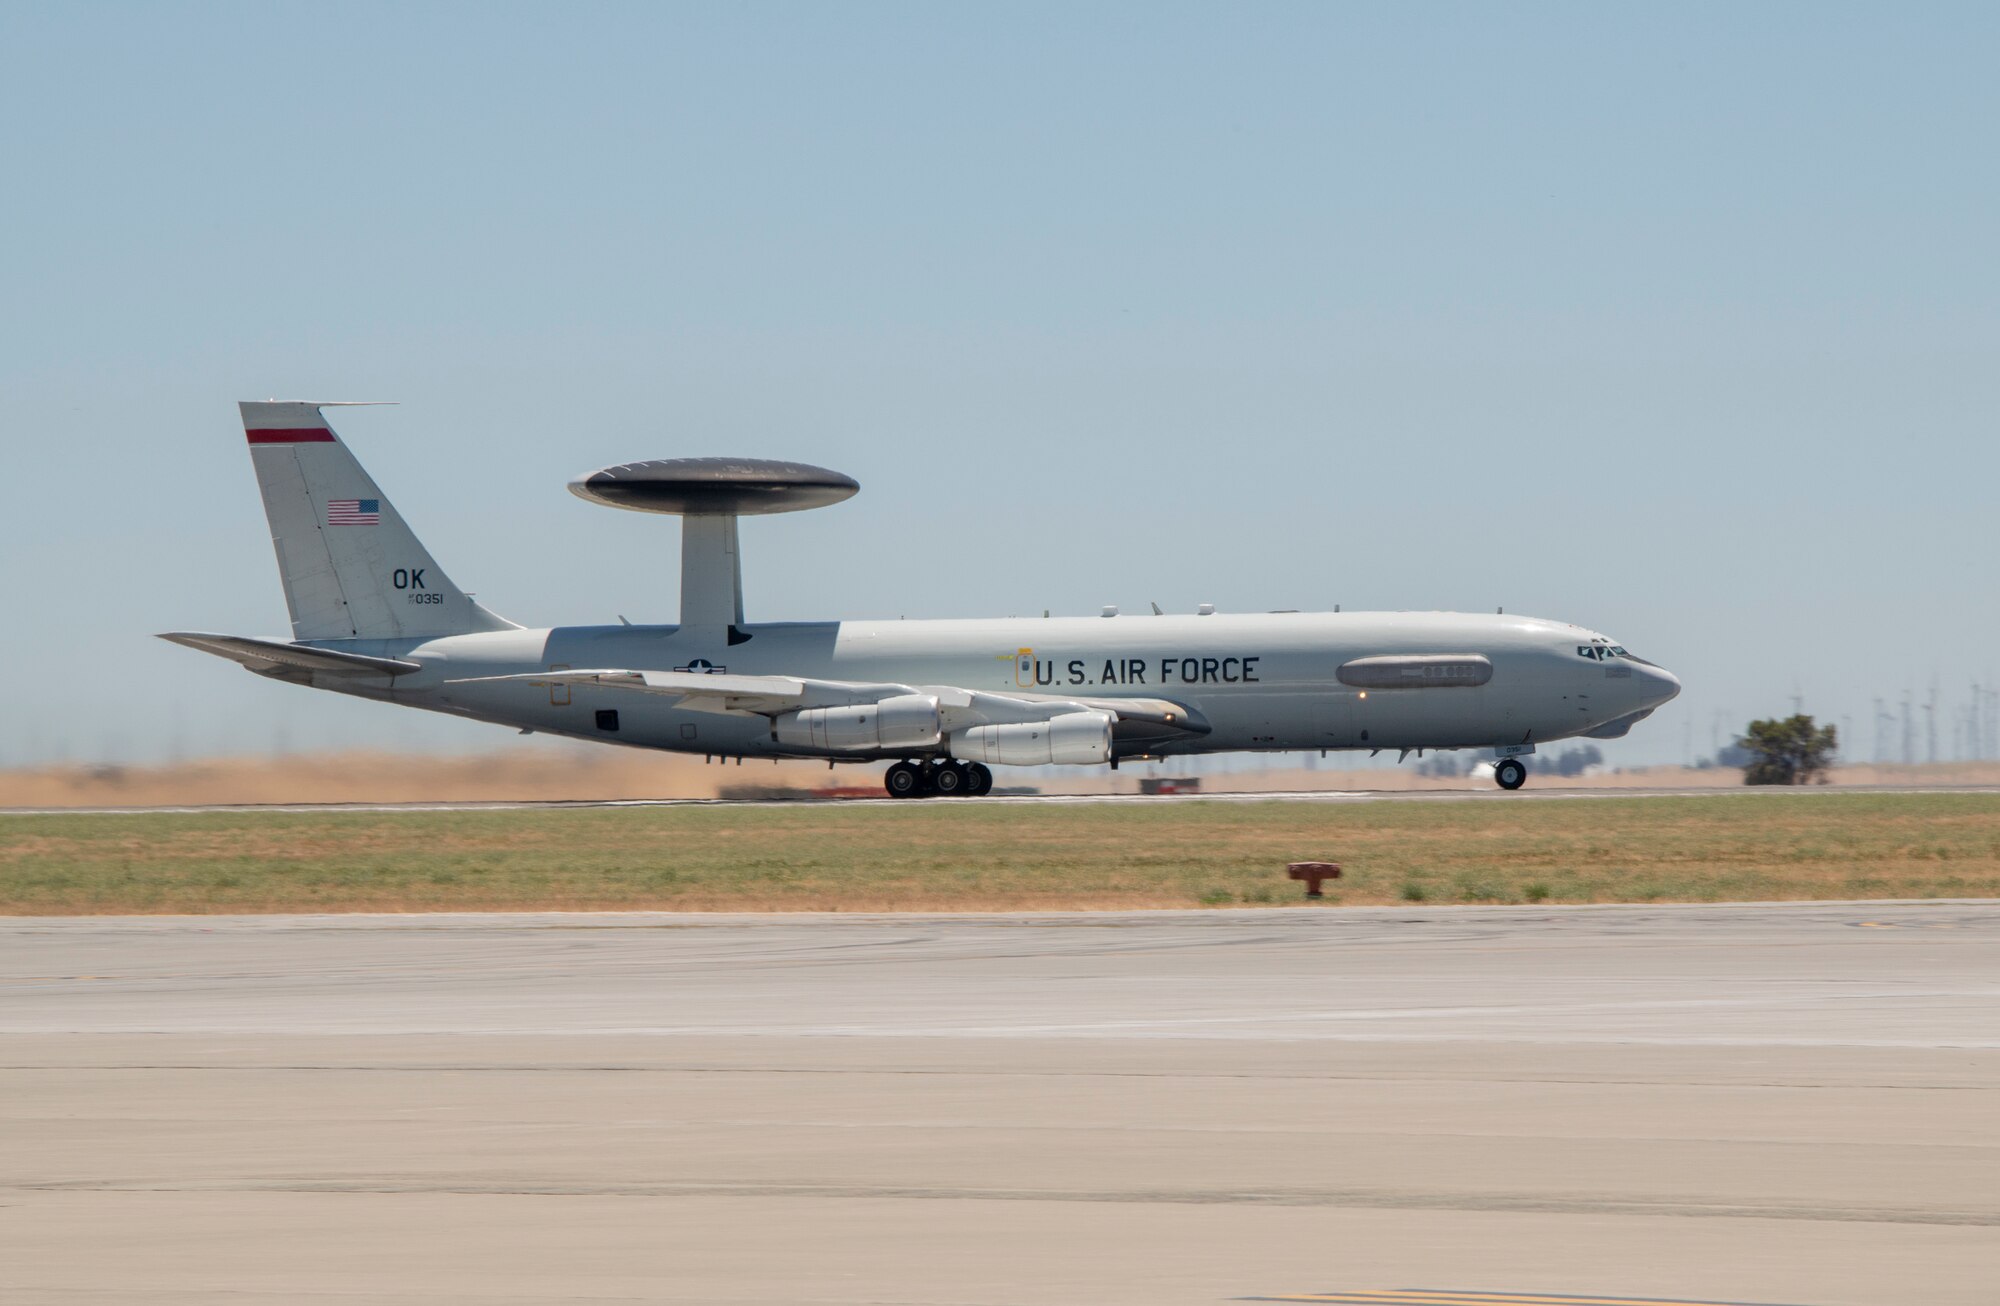 An E-3 Sentry Airborne Warning and Control System aircraft departs July 11, 2019, at Travis Air Force Base, California. The aircraft is equipped with a 30-foot-wide radar subsystem that permits surveillance up to the Earth's stratosphere and is assigned to Tinker Air Force Base, Oklahoma. (U.S. Air Force photo by Heide Couch)